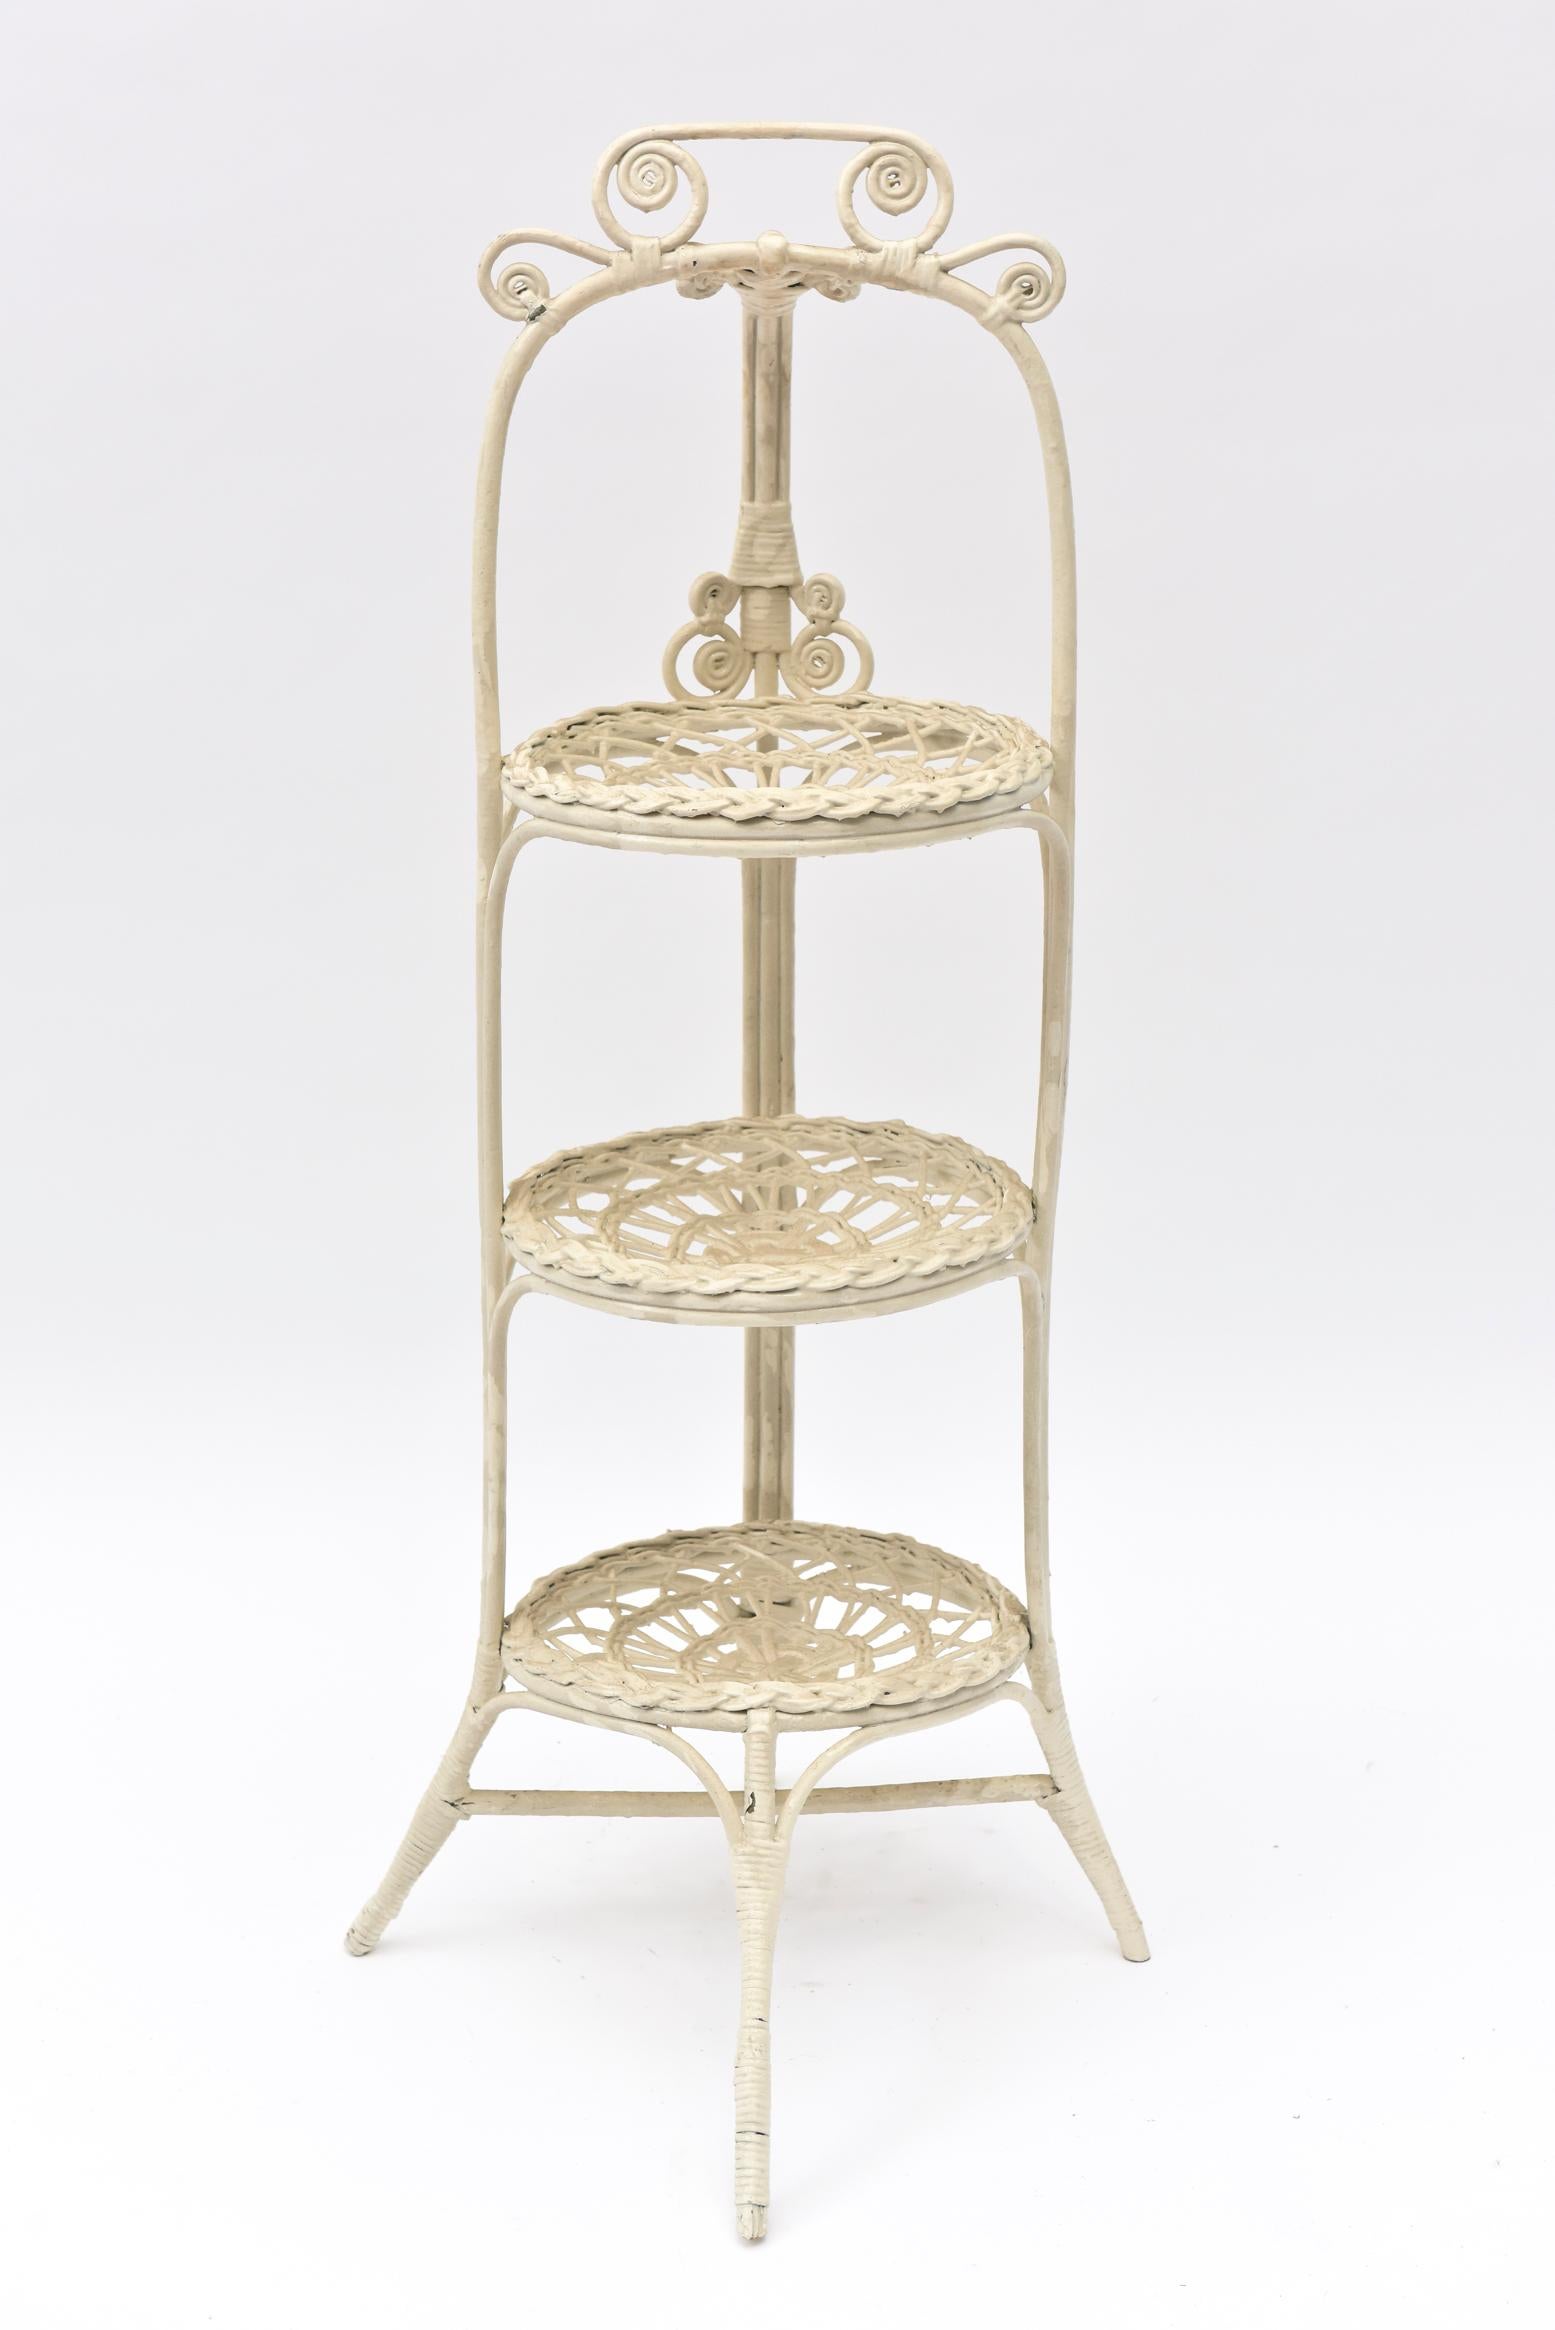 The ornate muffin stand has splay feet and 3 tiers made to hold 3 cake or muffin plates. The base and top of the handle have ornate curlicues while the plate holder sections are intricately woven to show off the round area where plates of sweets